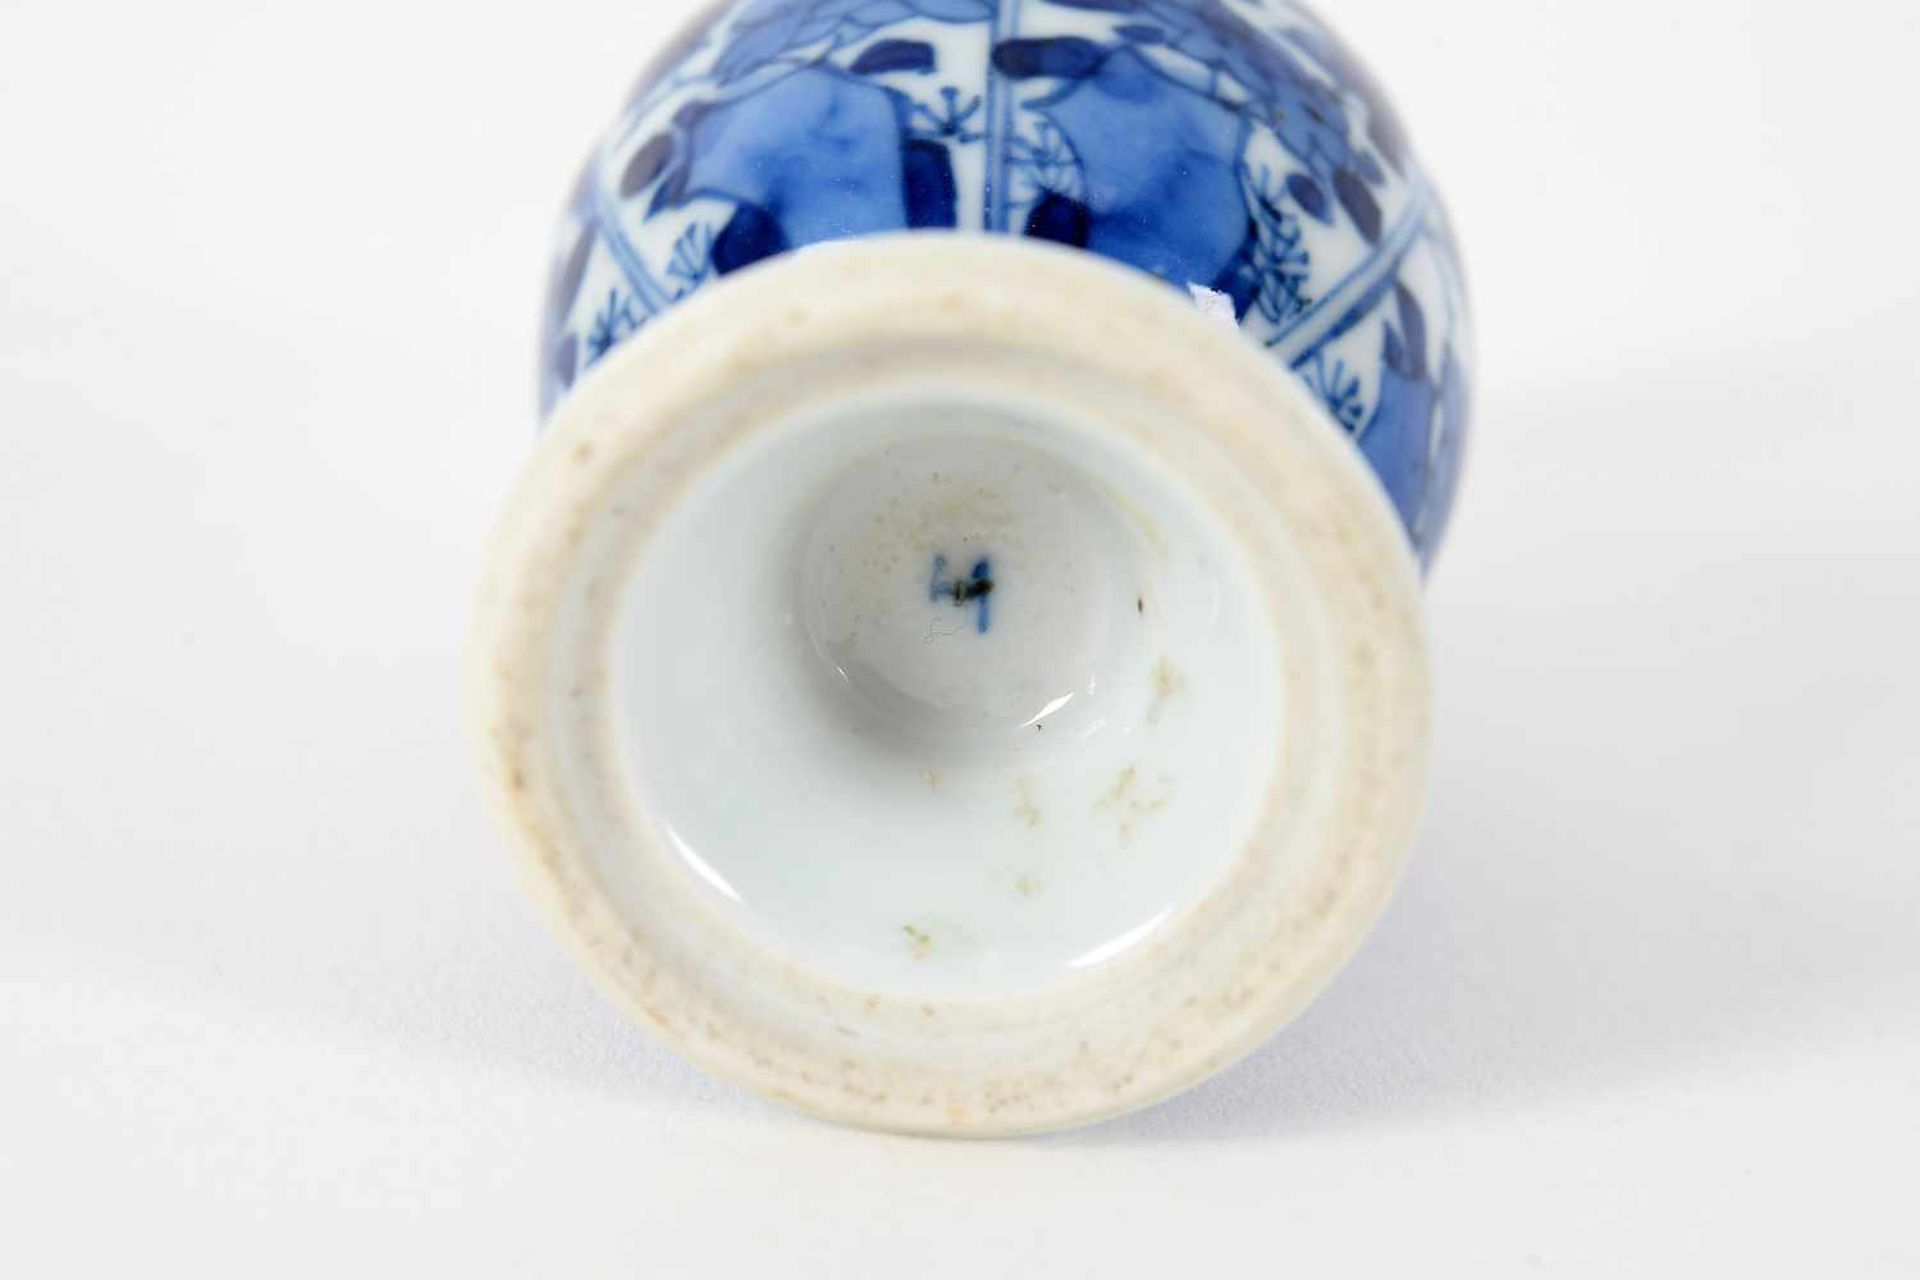 Lot of three diverse blue and white porcelain miniature vases, decorated with flowers, figures, - Image 14 of 14